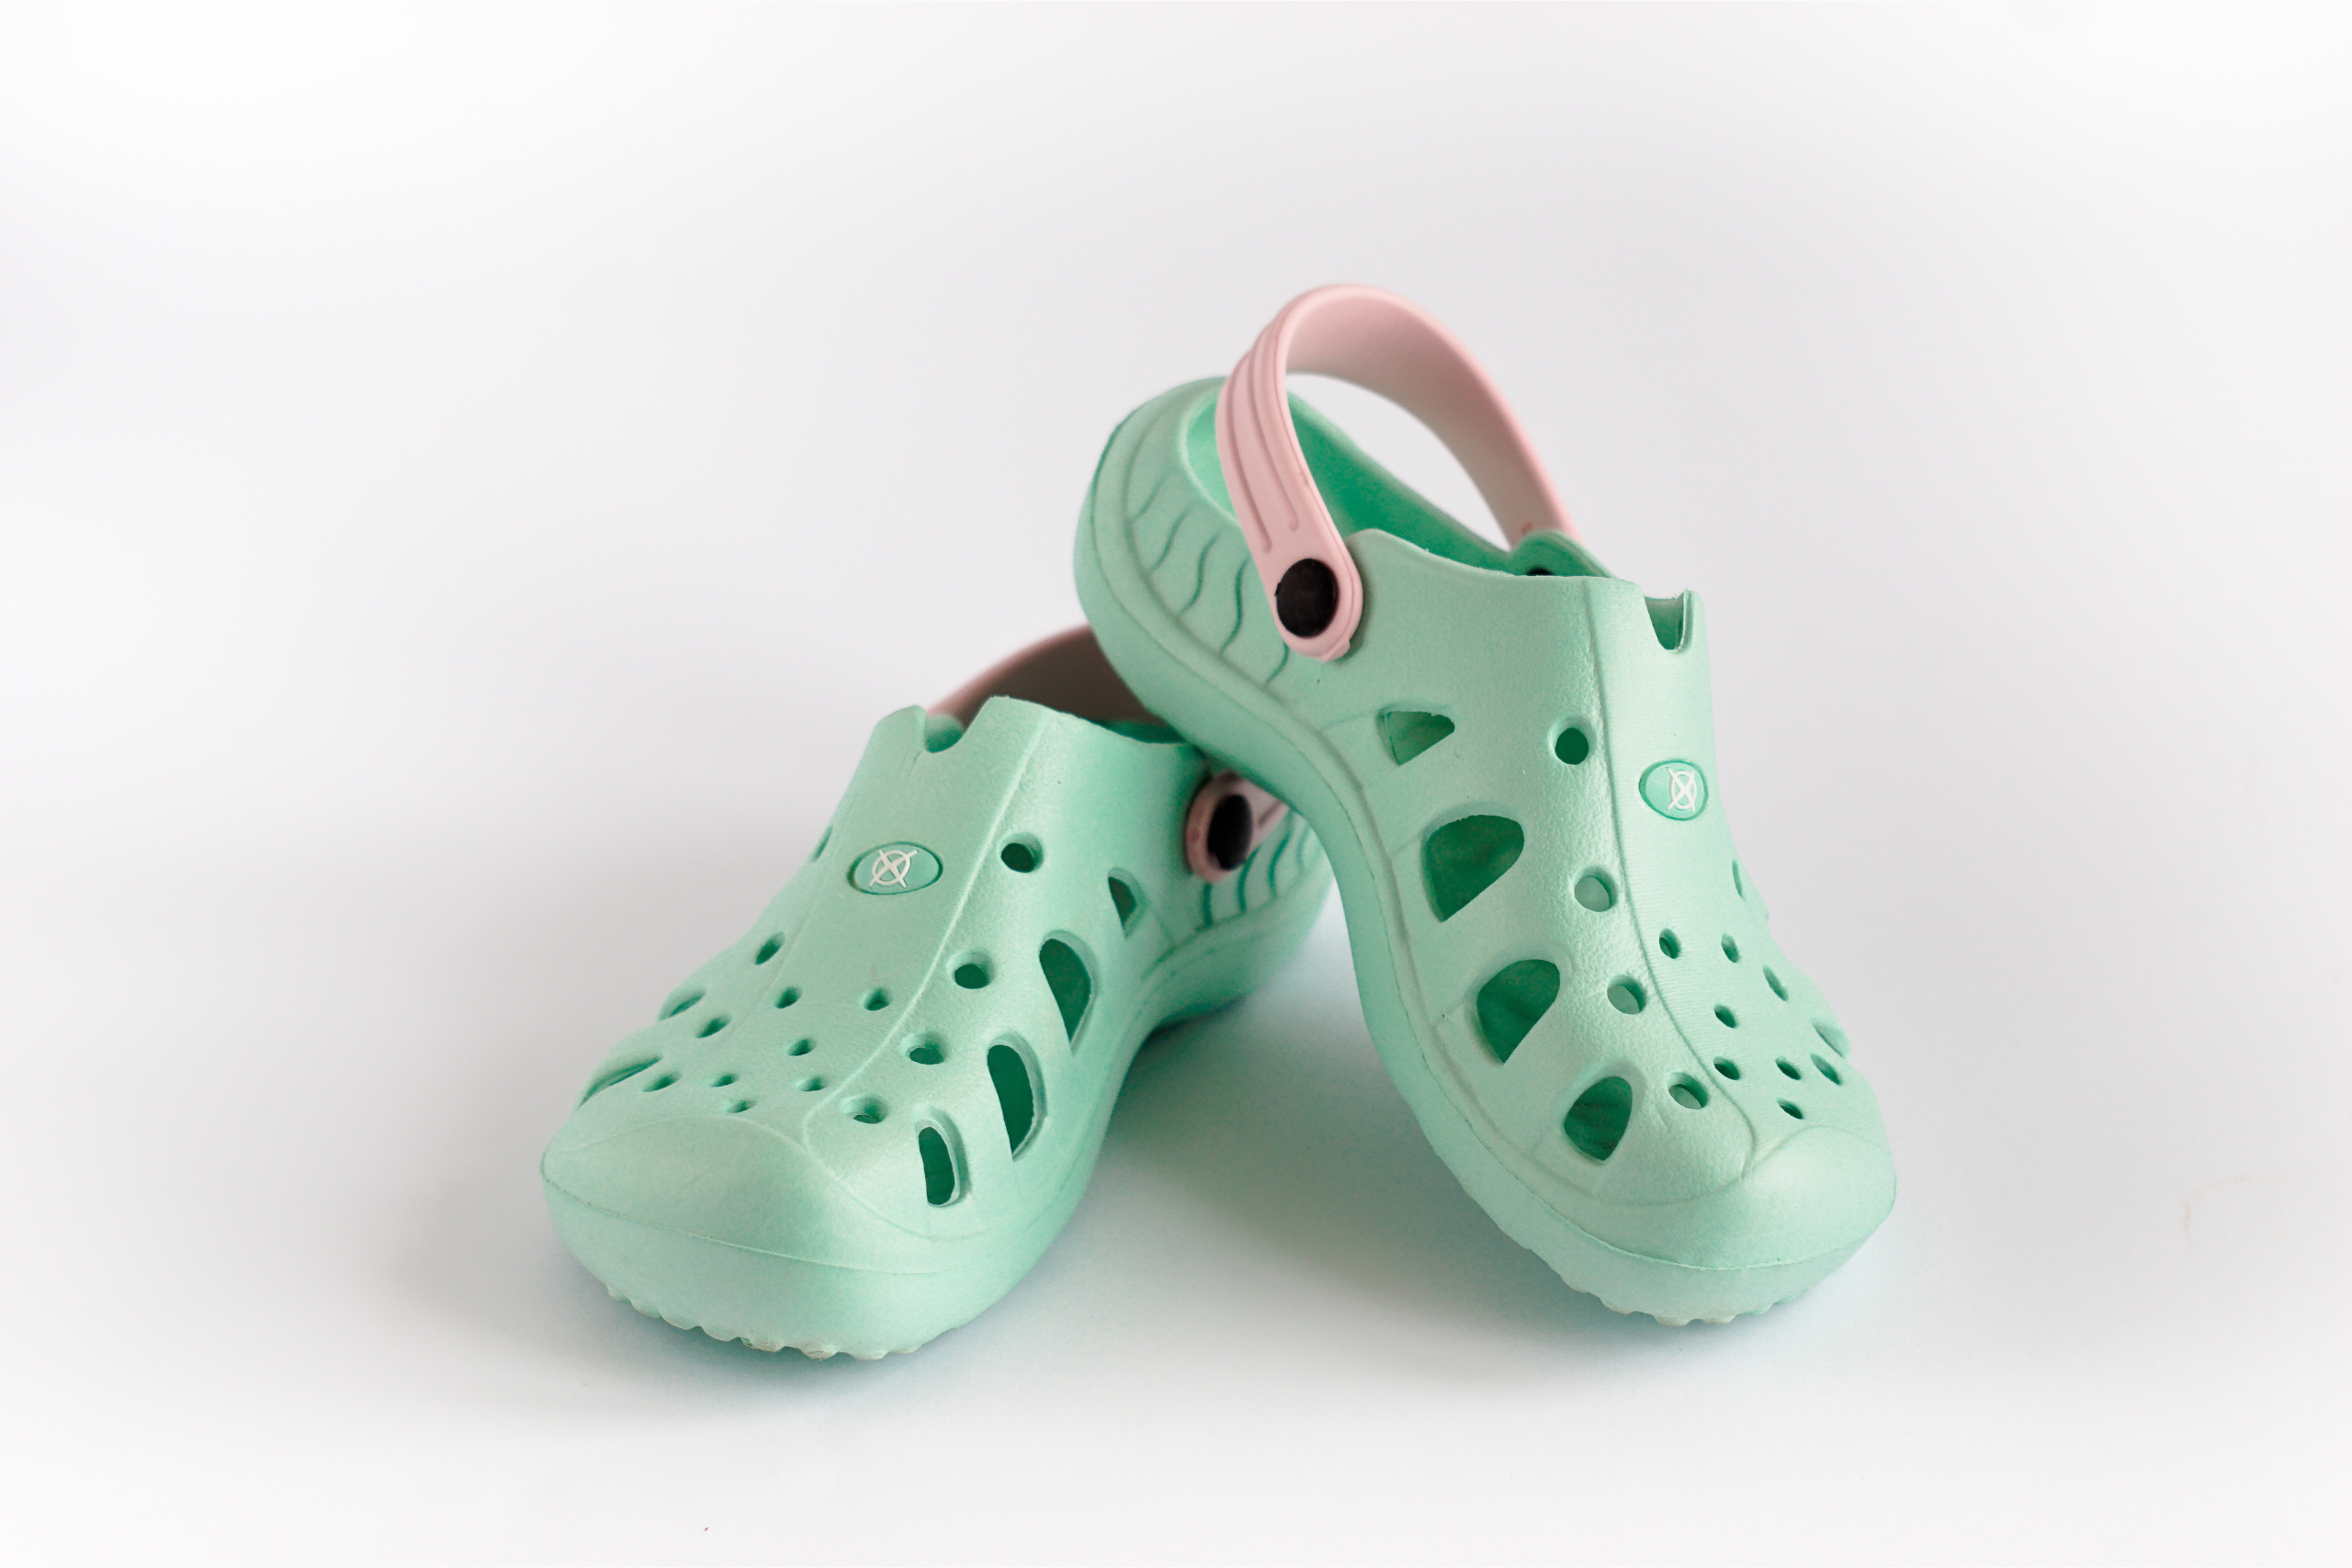 crocs lookalike shoes against a white background